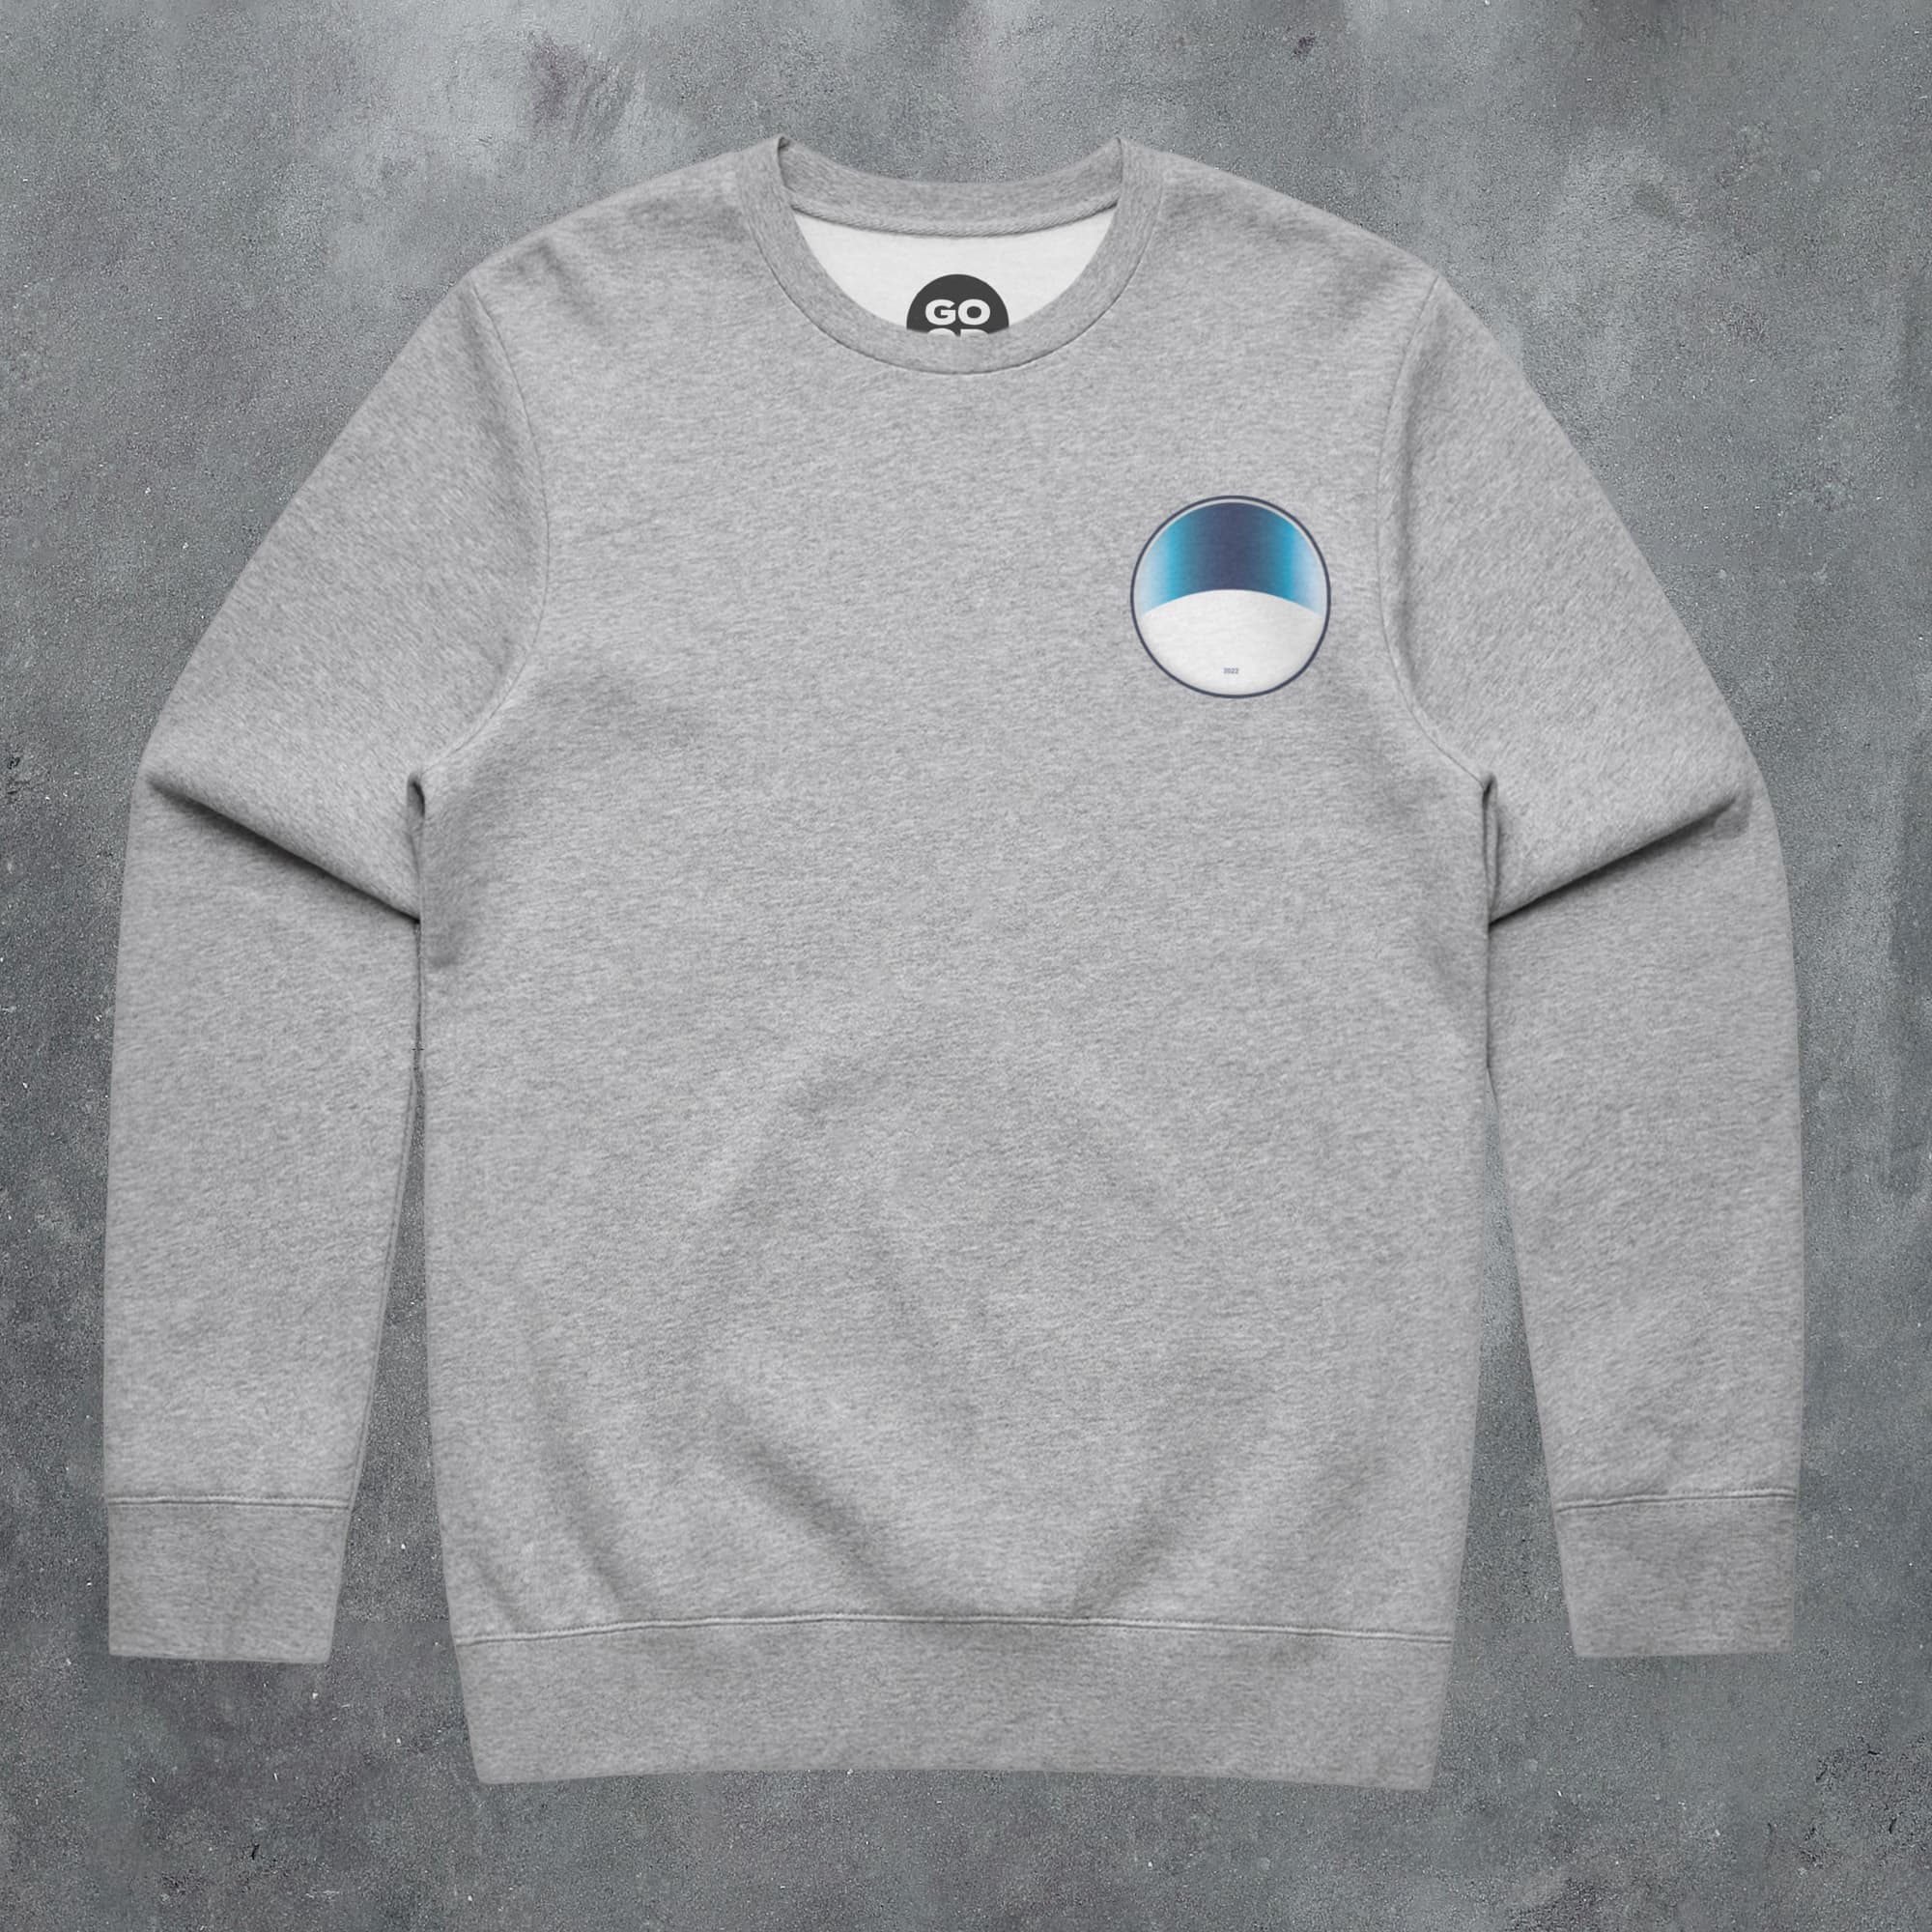 a grey sweatshirt with a blue and white circle on it